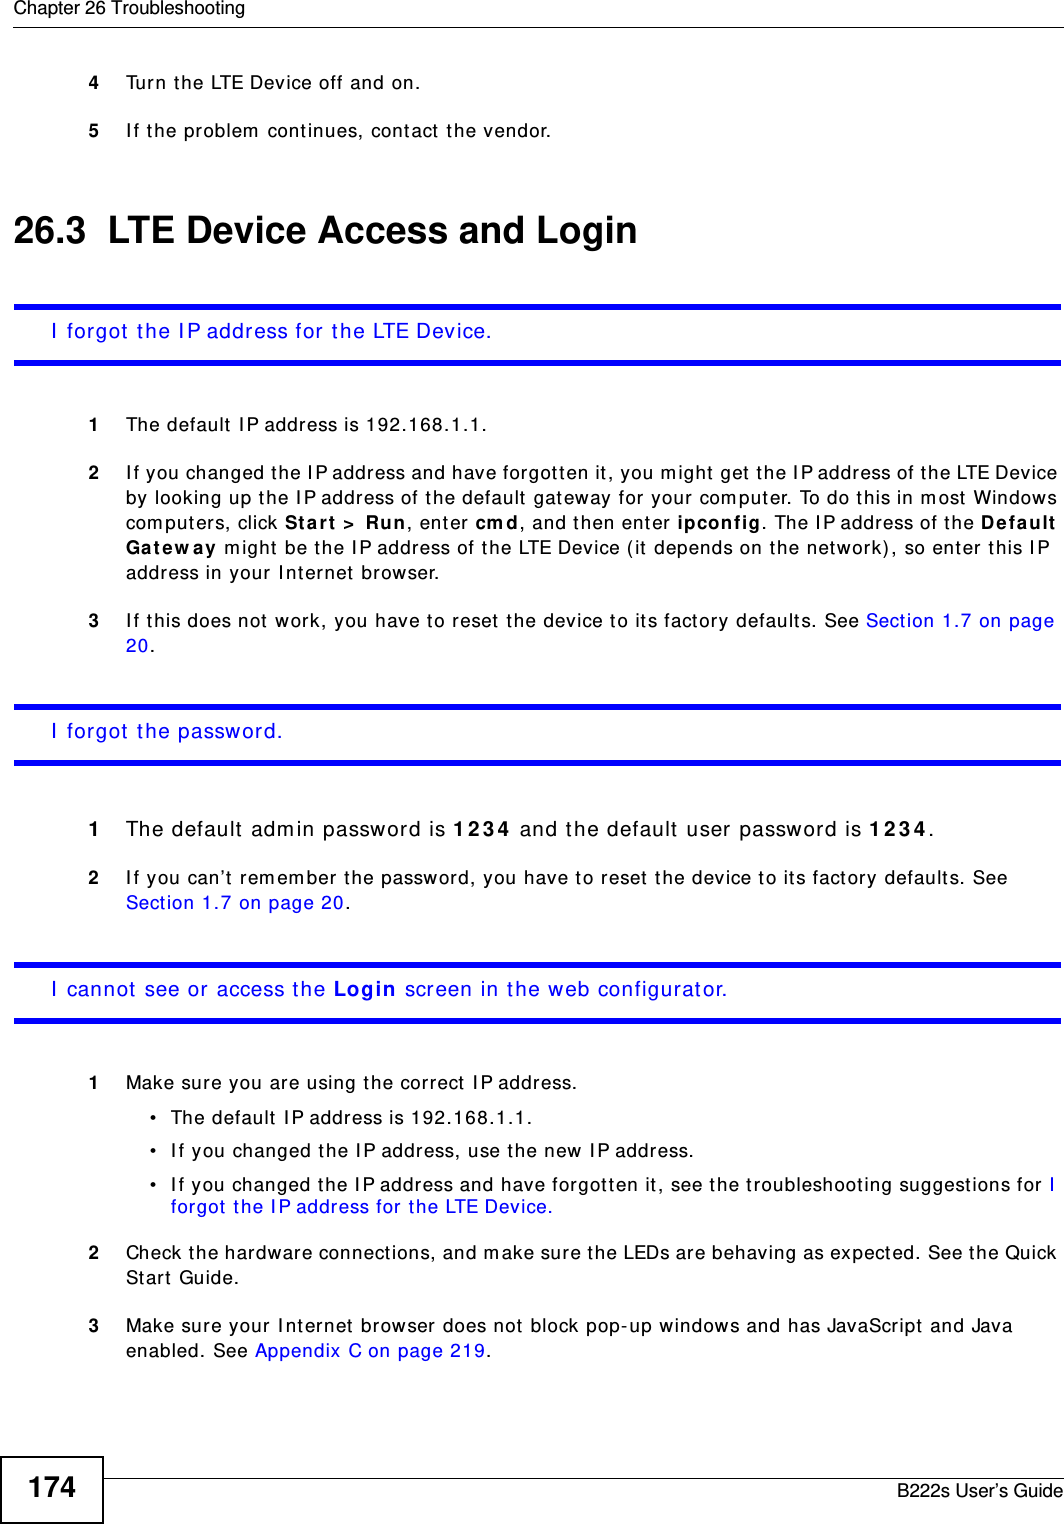 Chapter 26 TroubleshootingB222s User’s Guide1744Turn t he LTE Device off and on. 5I f t he problem  cont inues, cont act  t he vendor.26.3  LTE Device Access and LoginI  forgot t he I P address for t he LTE Device.1The default I P address is 192.168.1.1.2I f you changed t he I P address and have forgot t en it, you m ight get the I P address of t he LTE Device by looking up t he I P address of the default gat eway for your com put er. To do t his in m ost Windows com puters, click Sta rt  &gt;  Ru n, ent er cm d, and t hen ent er ipconfig. The I P address of t he De fa ult  Ga t ew a y m ight be t he I P address of t he LTE Device ( it  depends on the network) , so ent er t his I P address in your I nt ernet  brow ser. 3I f t his does not  work, you have t o reset  t he device to it s fact ory default s. See Sect ion 1.7 on page 20.I  forgot t he password.1The default  adm in password is 1 2 3 4  and t he default  user password is 1 2 3 4 .2I f you can’t  rem em ber the password, you have t o r eset the device to it s factory default s. See Section 1.7 on page 20.I  cannot see or access t he Login screen in the web configurat or.1Make sure you are using t he correct  I P address.• The default I P address is 192.168.1.1.• I f you changed t he I P address, use t he new I P address.• I f you changed t he I P address and have forgot t en it, see t he t roubleshooting suggestions for I  forgot  t he I P address for t he LTE Device.2Check the hardware connect ions, and m ake sure t he LEDs are behaving as expect ed. See t he Quick St art  Guide.3Make sure your I nt ernet  browser does not  block pop- up windows and has JavaScript  and Java enabled. See Appendix C on page 219.